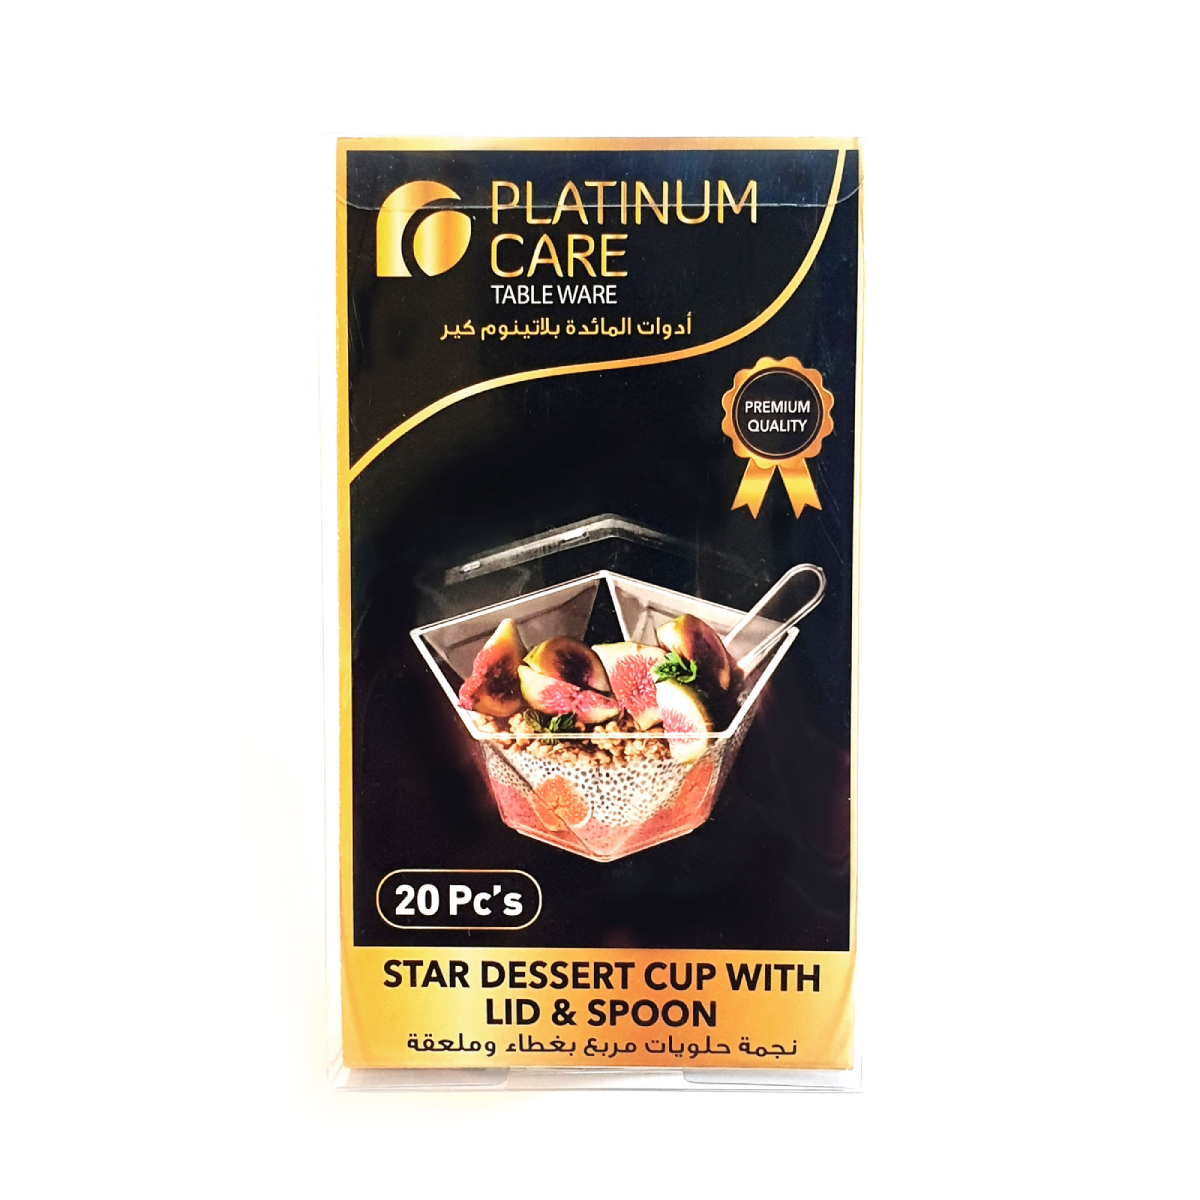 Platinum Care Star Dessert Cup With Lid & Spoon 20 pcs